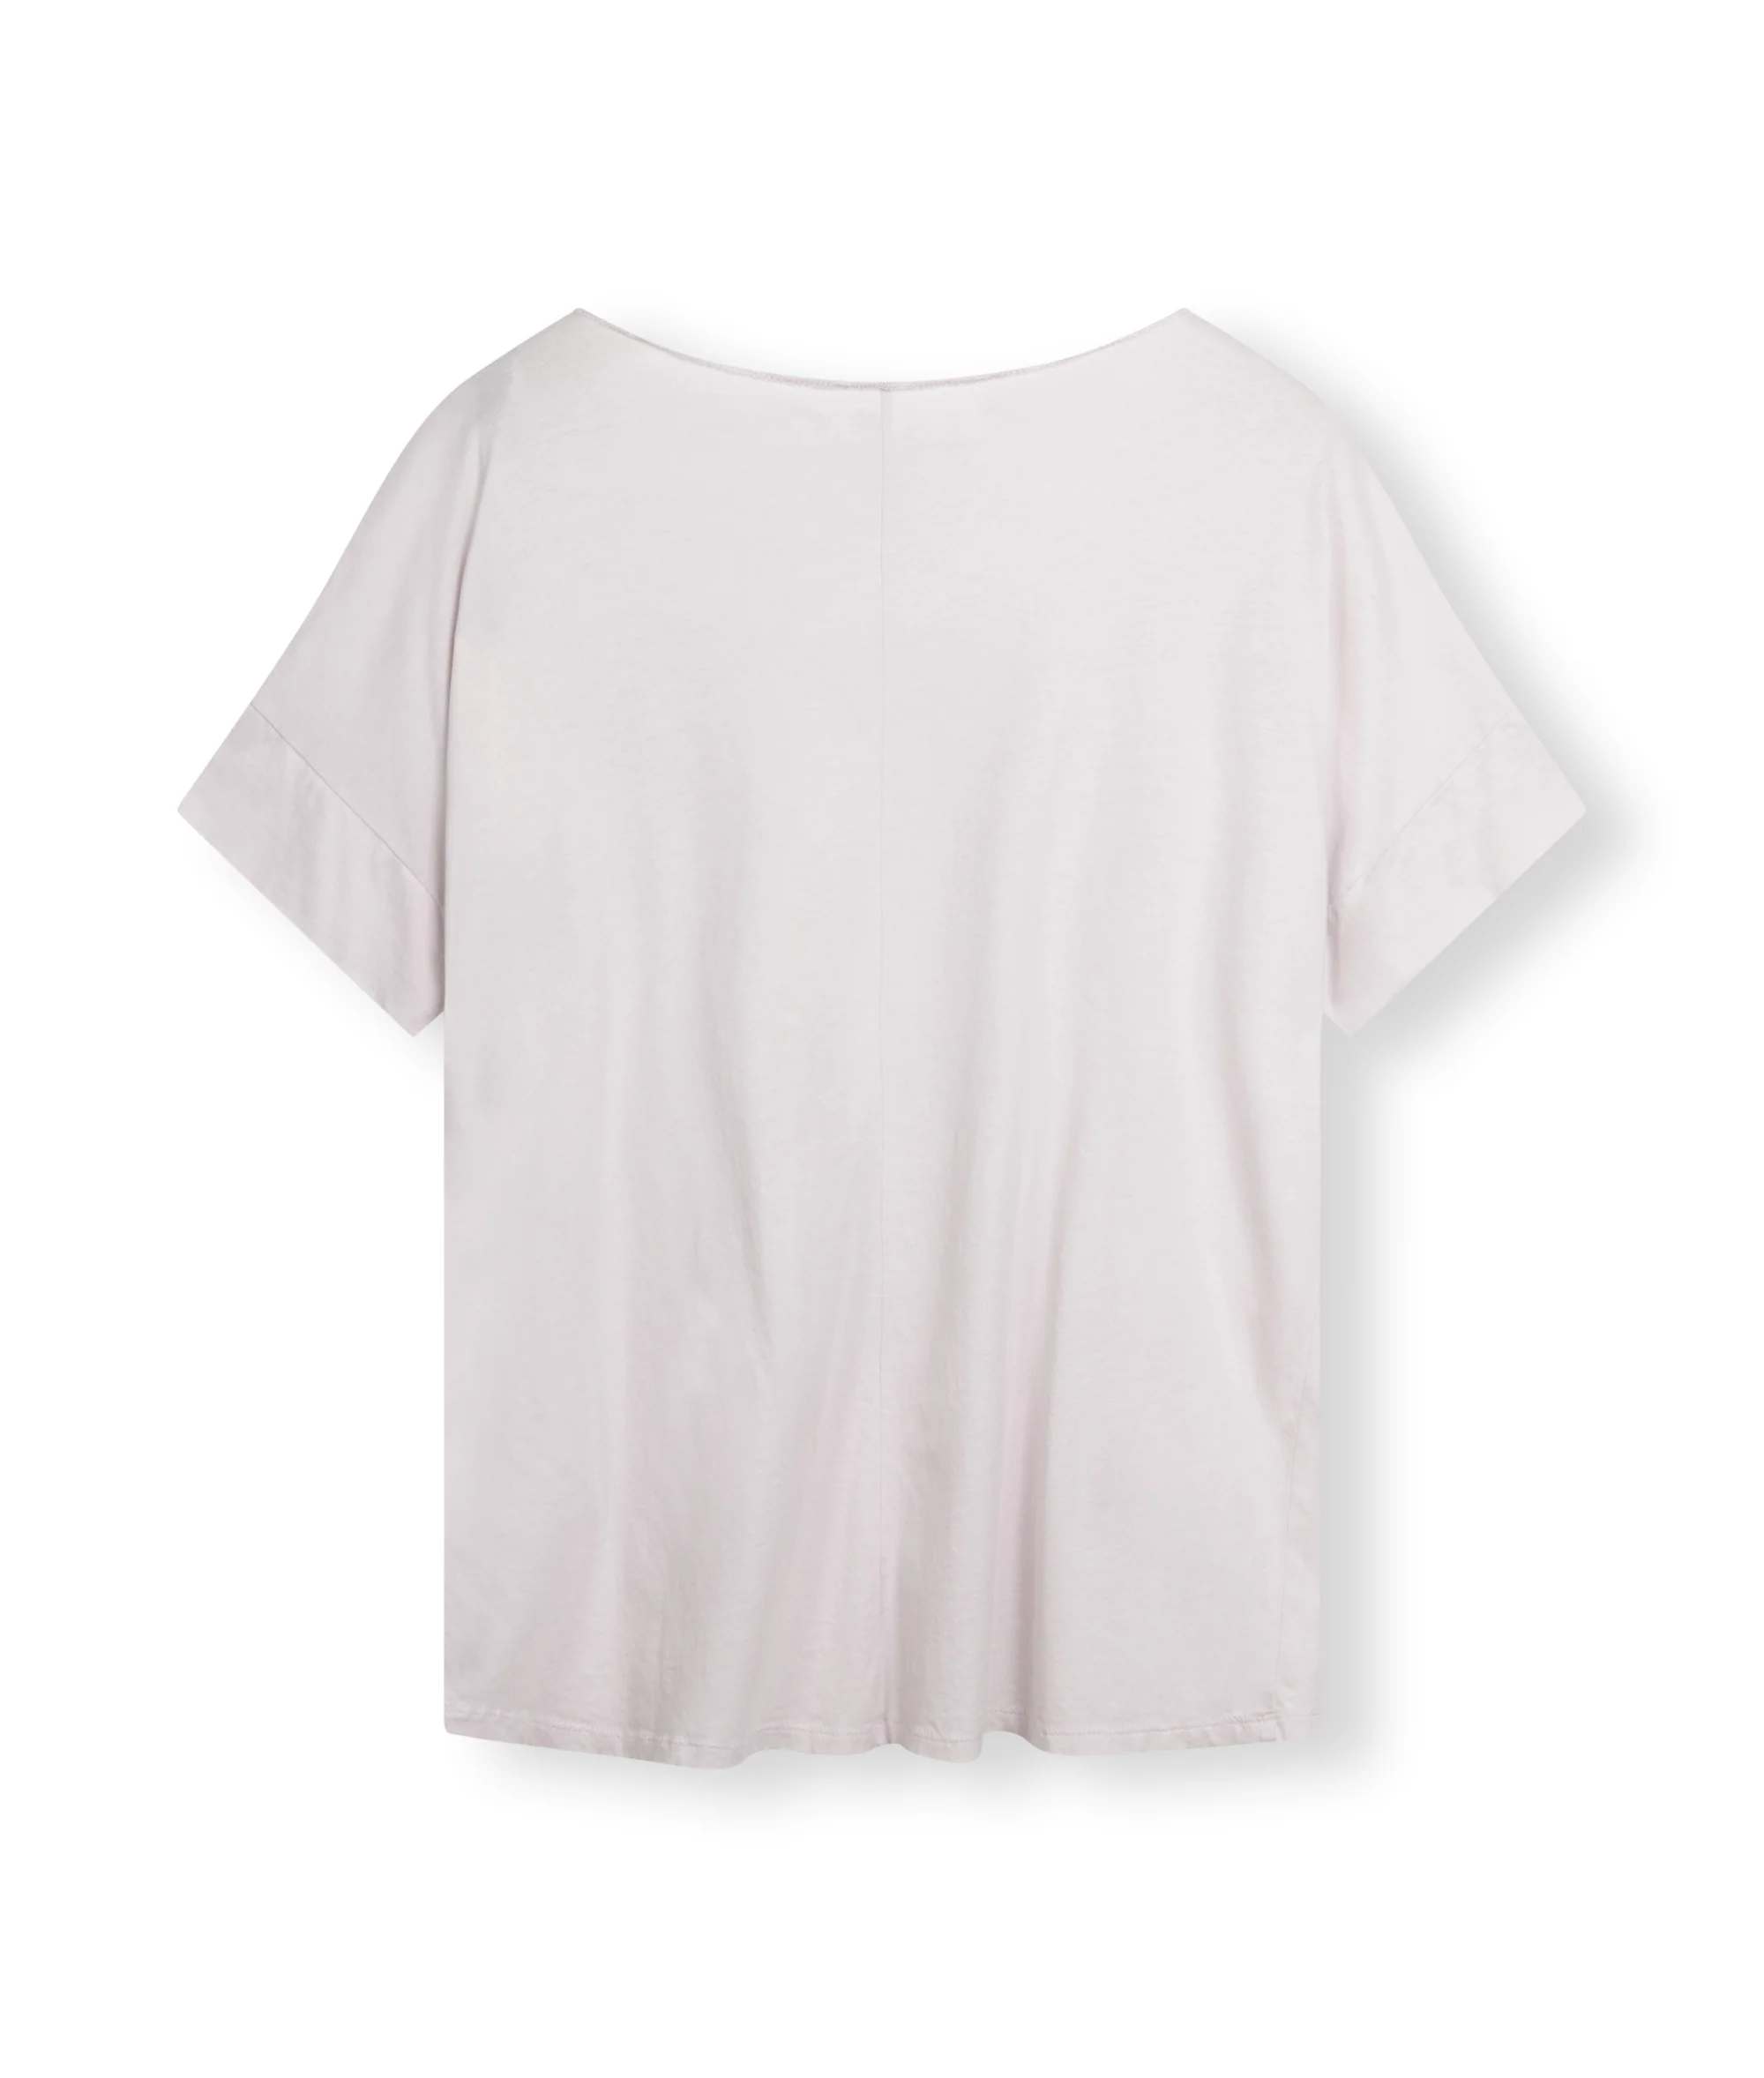 10DAYS Statement Tee Pale Lilac